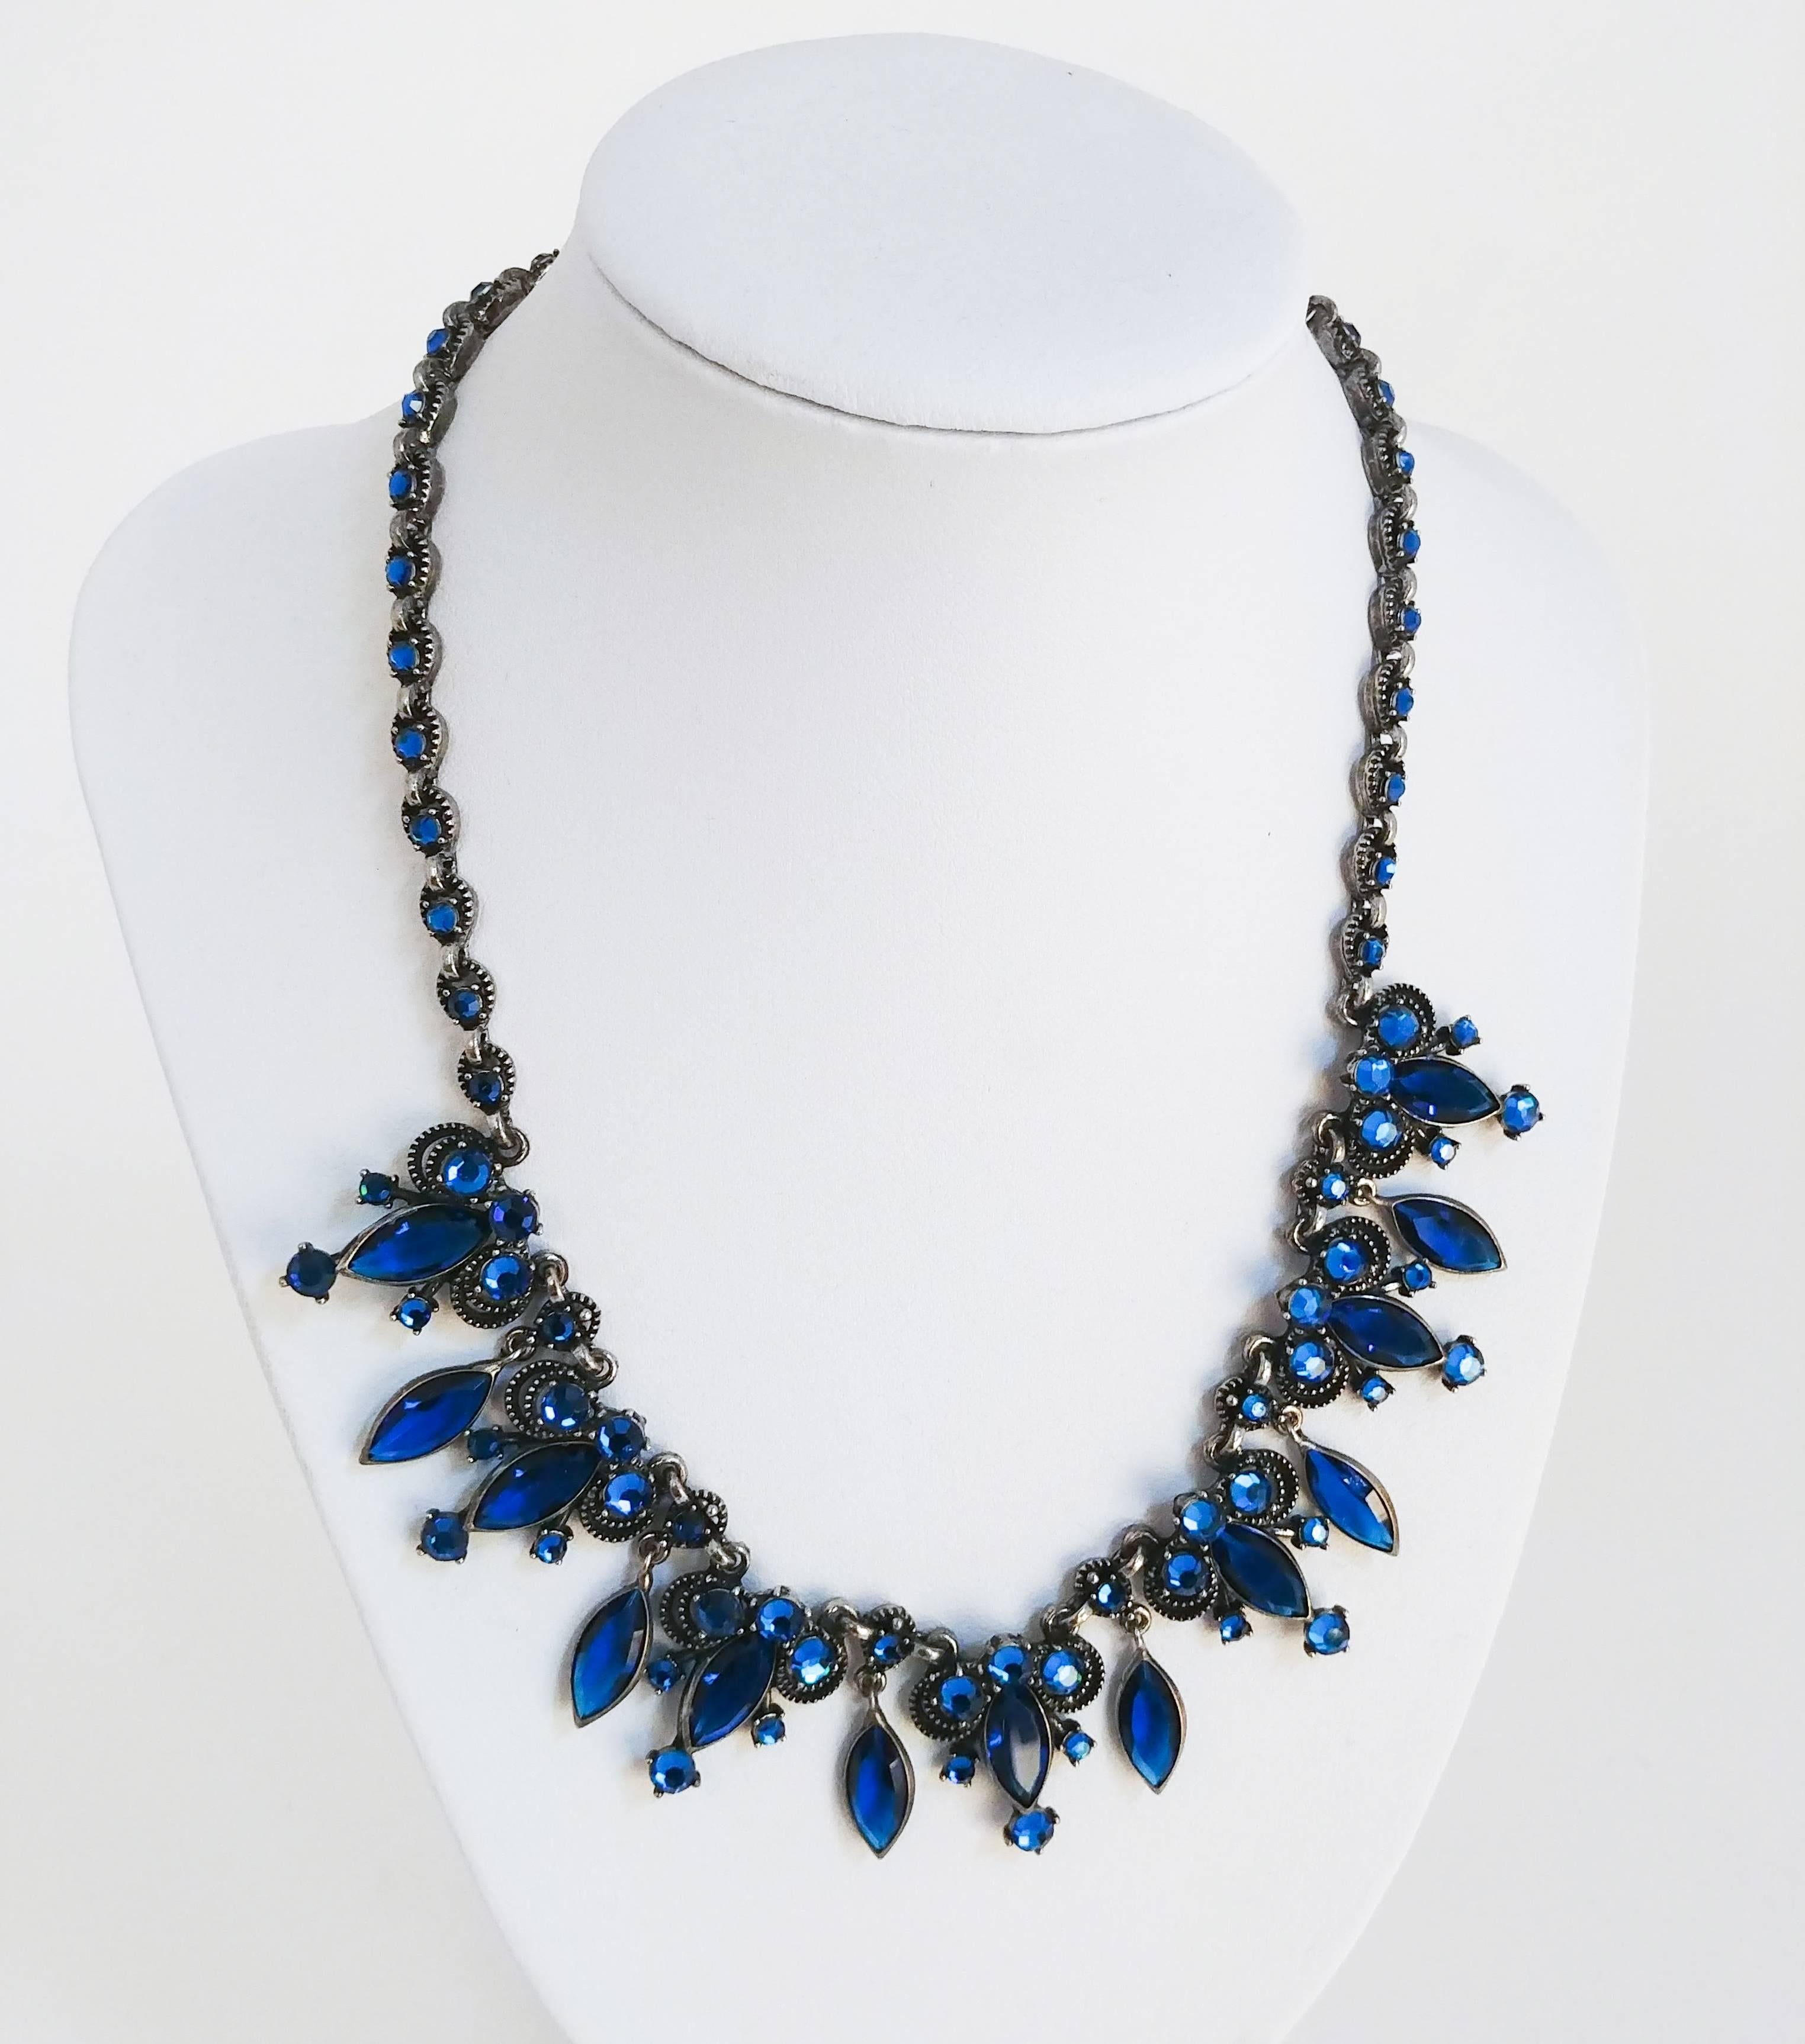 1960s Weiss Blue Rhinestone Set. Four piece set consists of necklace, clip-on earrings, bracelet, and brooch. 